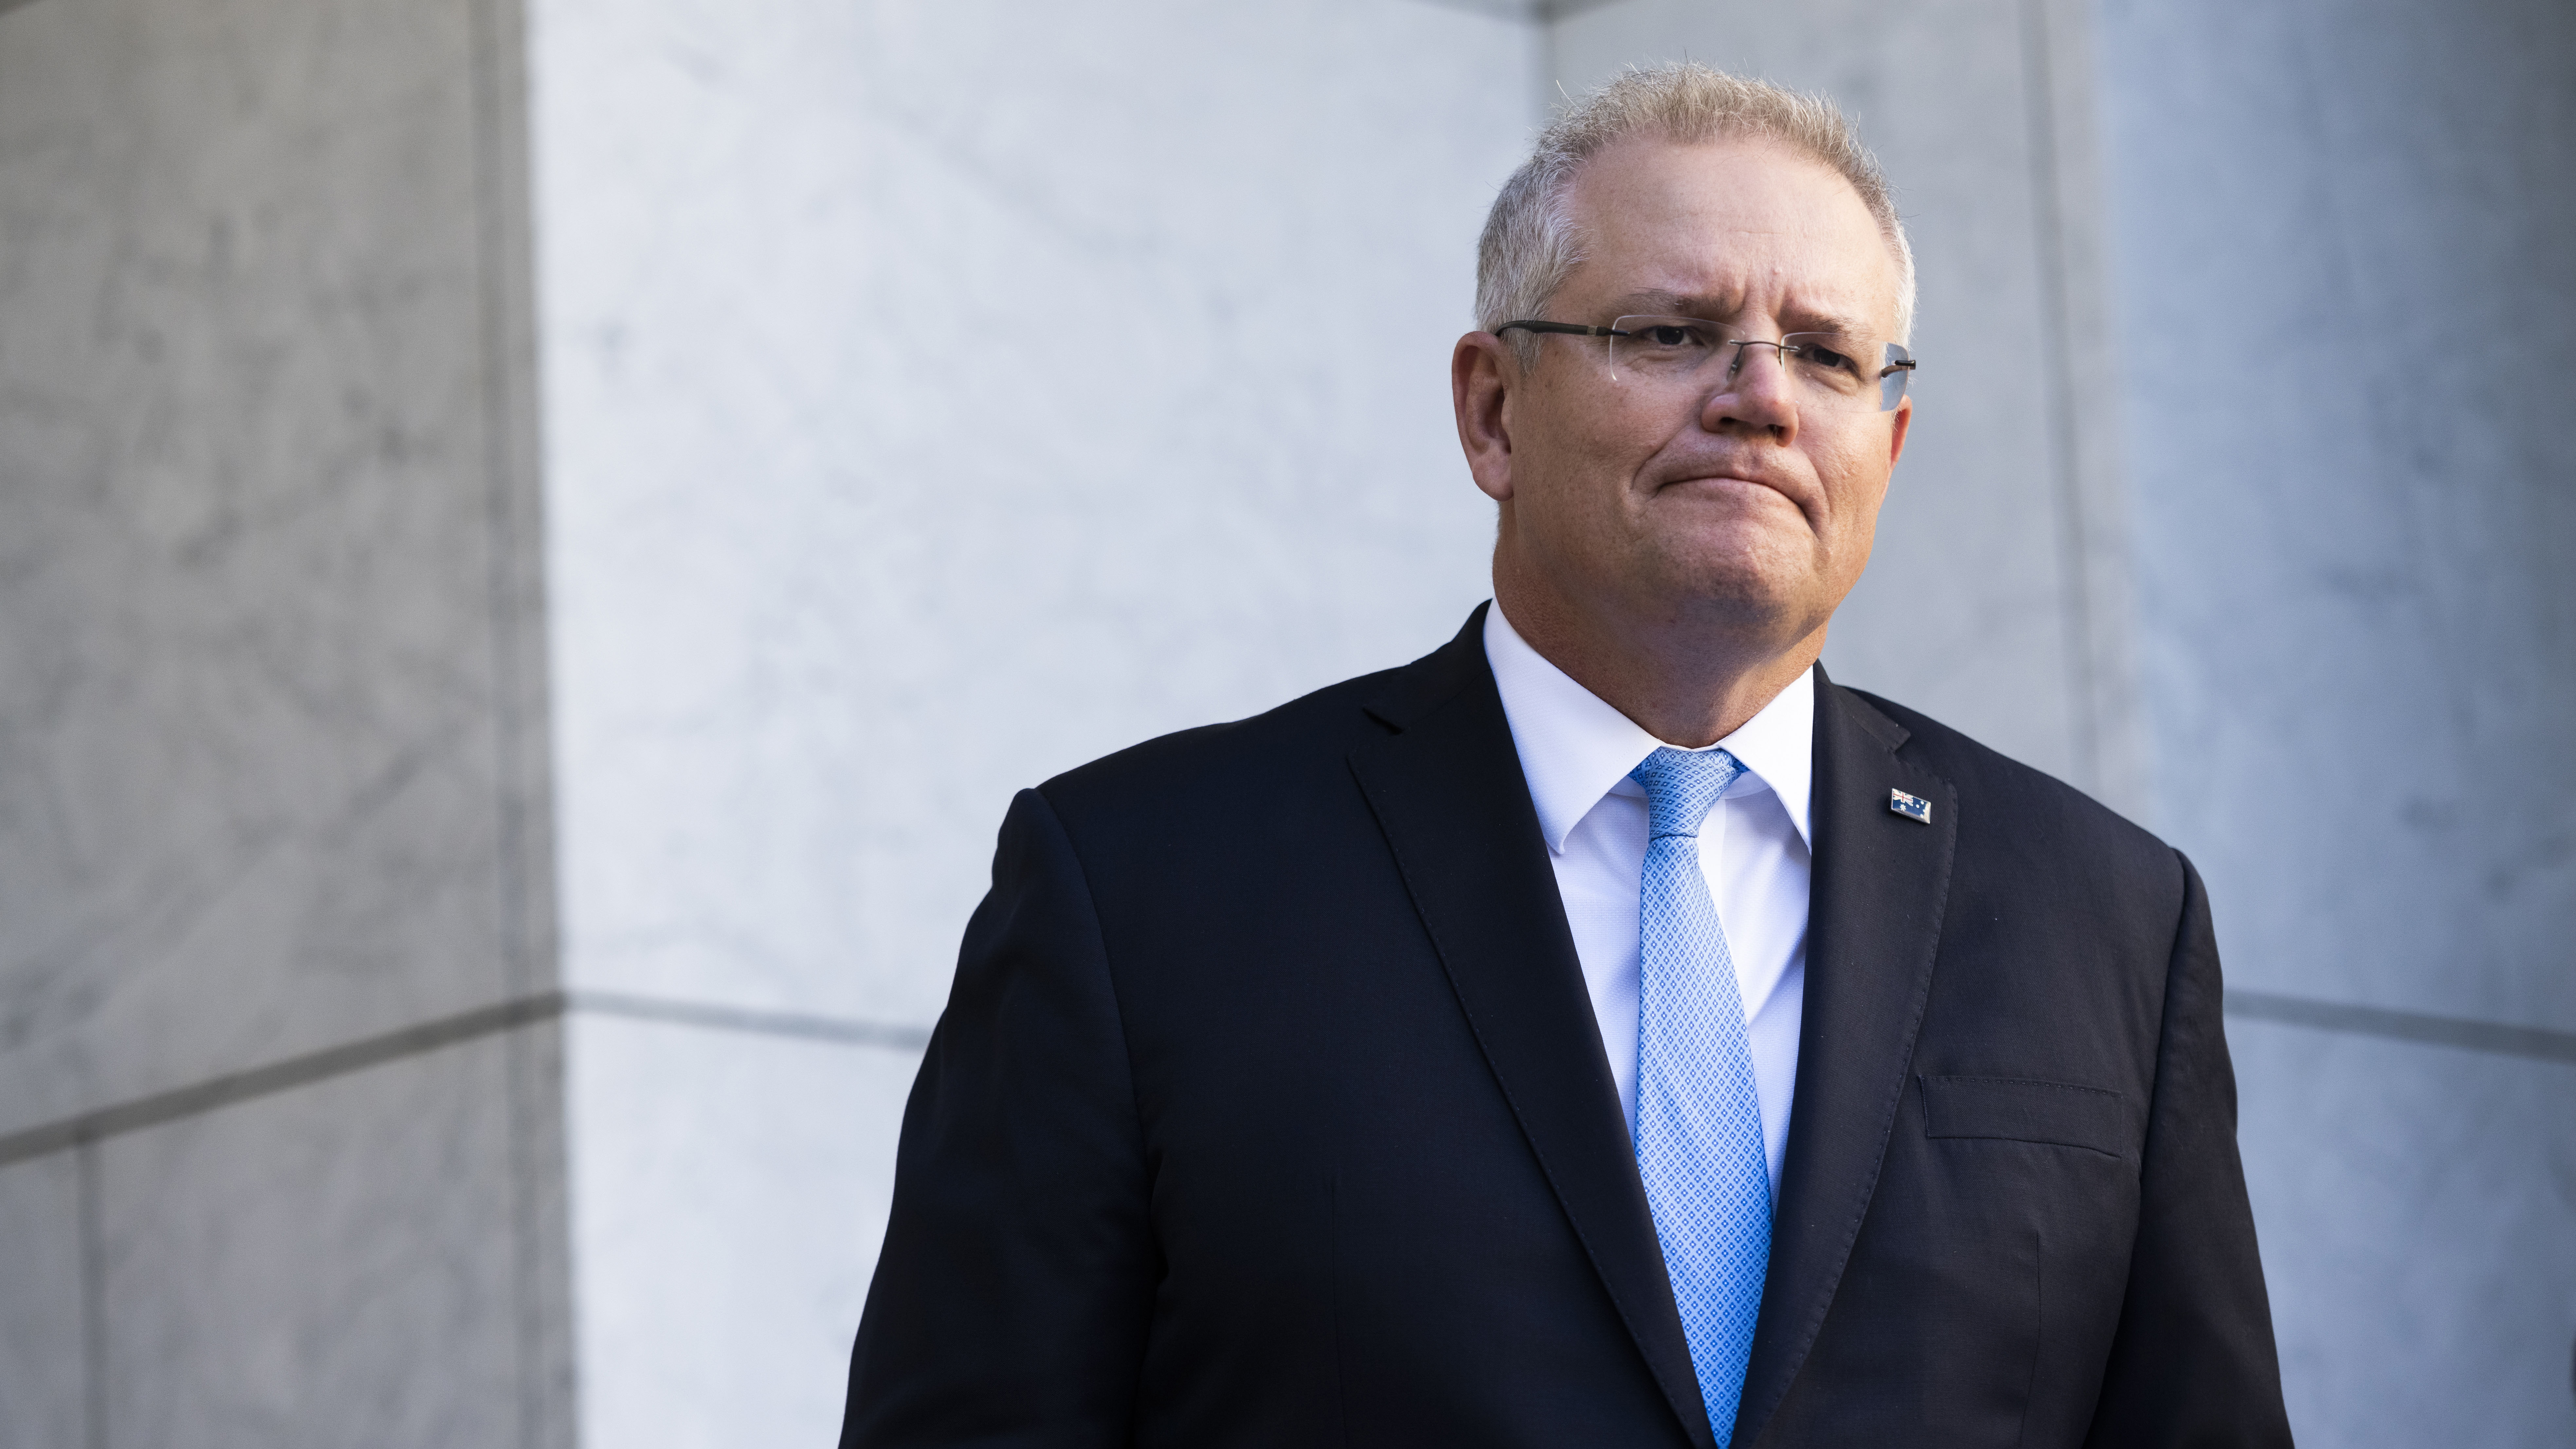 Australian Prime Minister Scott Morrison speaks during a press conference in Canberra, Australia, on May 15.